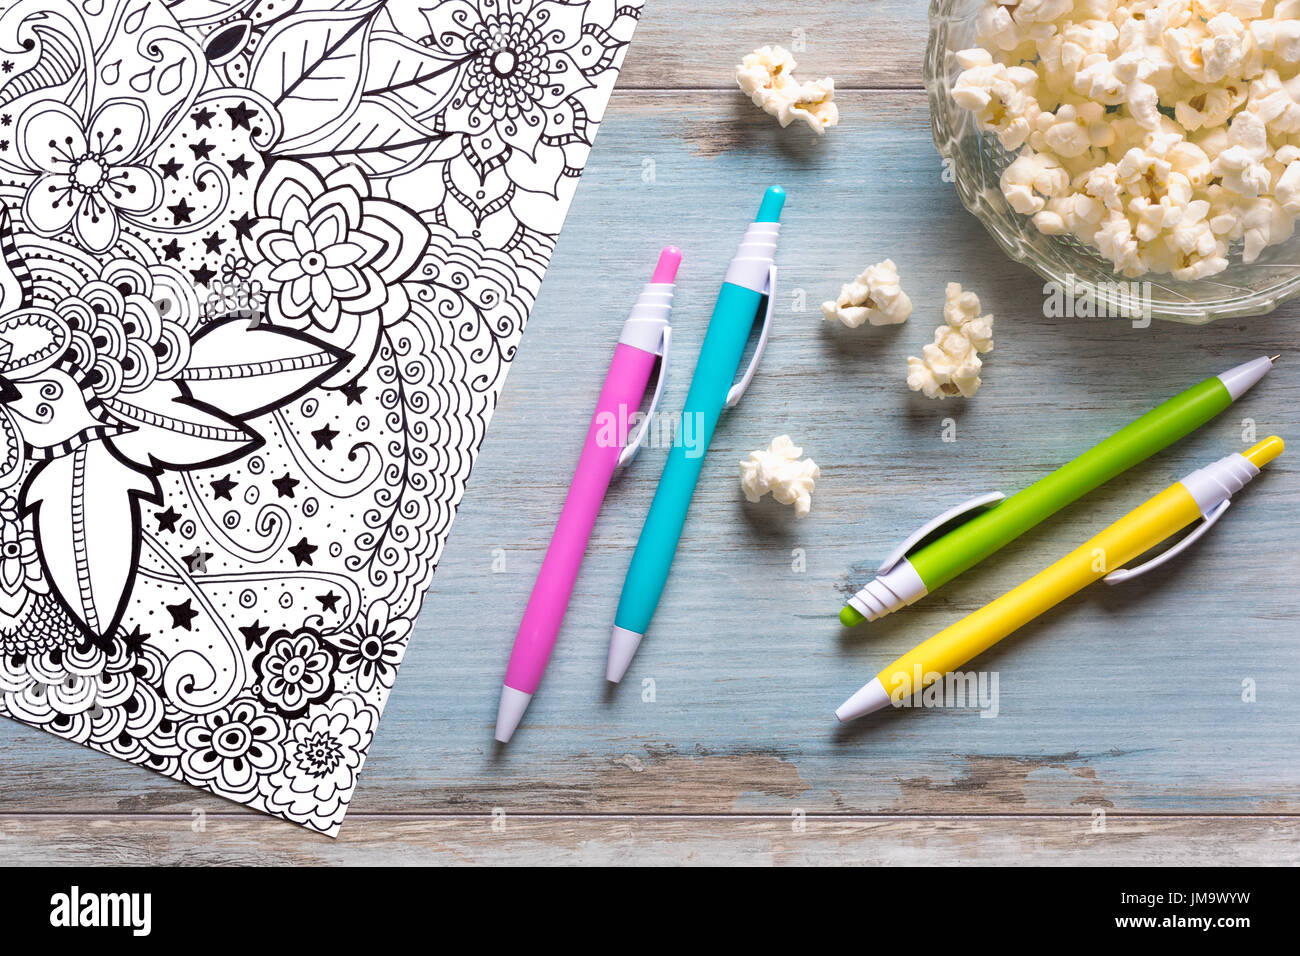 Adult Coloring Books And Variety Of Pencils Pens And Markers Stock Photo -  Download Image Now - iStock